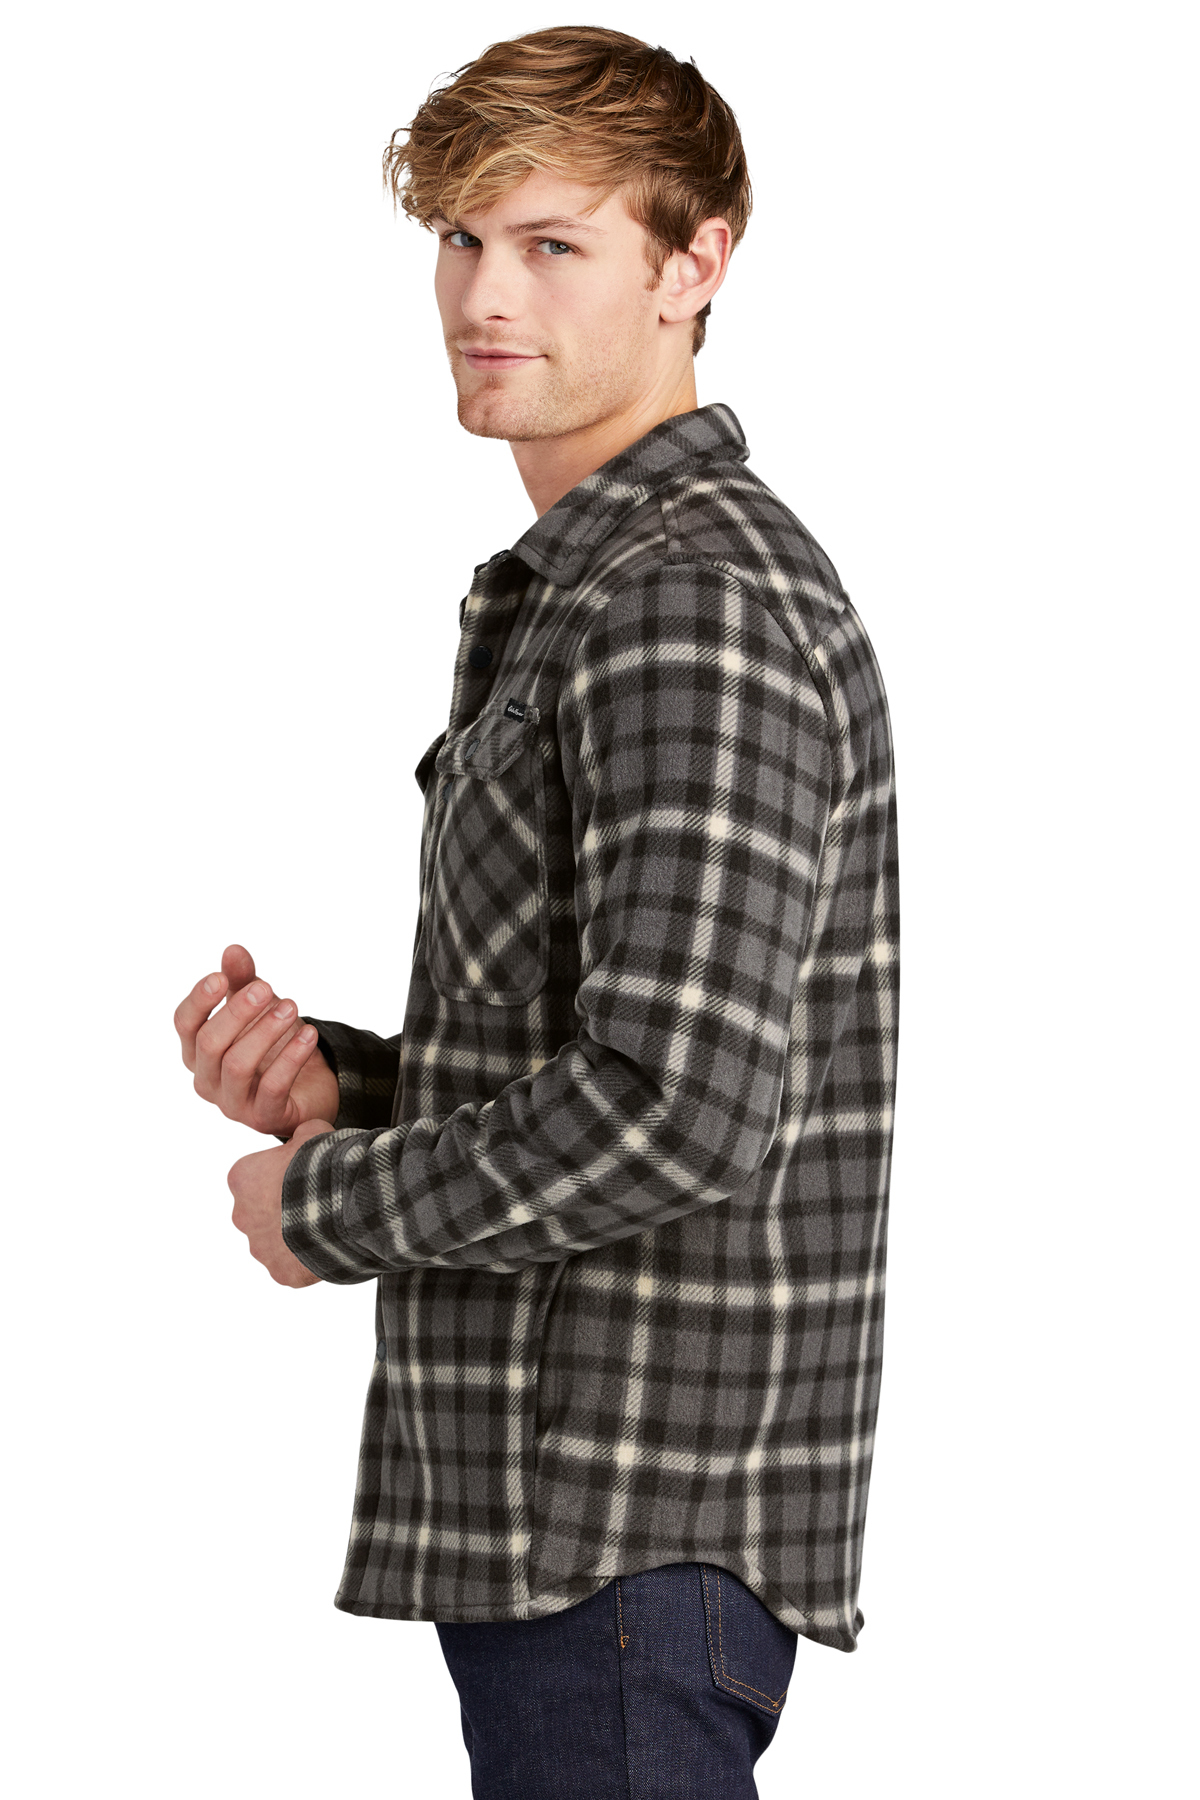 Eddie Bauer Woodland Shirt Jac | Product | Company Casuals